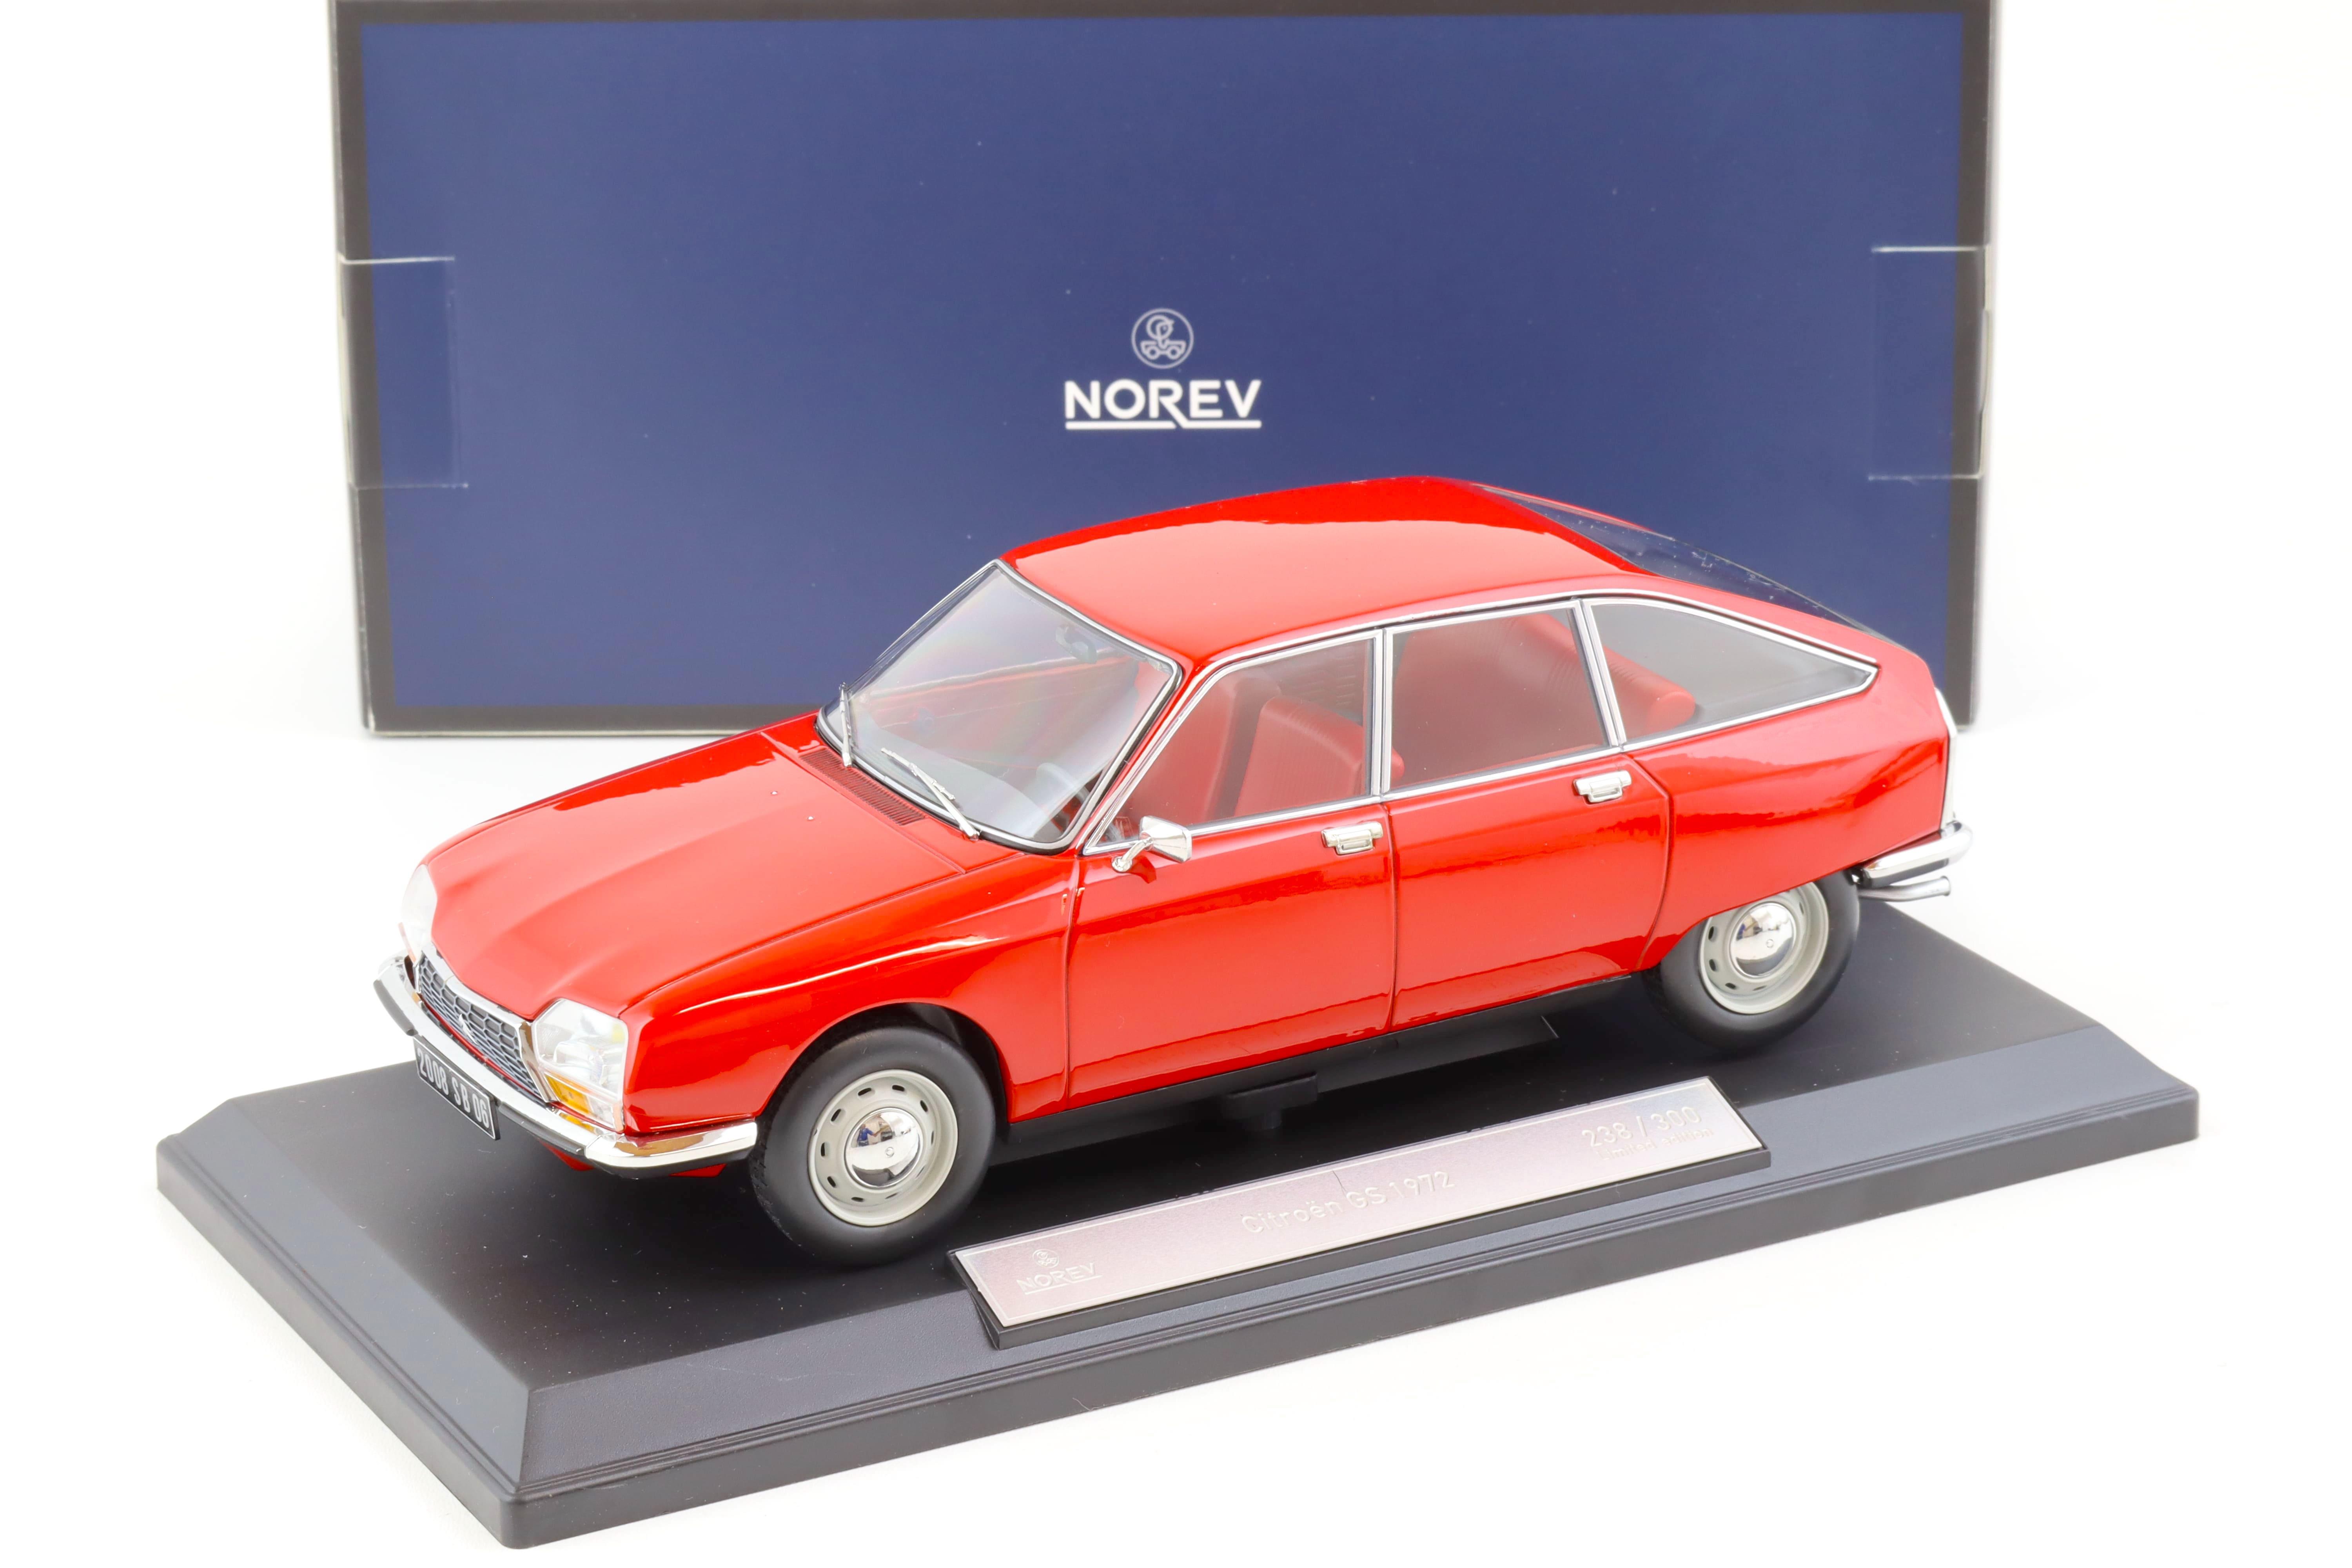 1:18 Norev Citroen GS 1972 Rio red 181668 - Limited Edition 300 pcs.